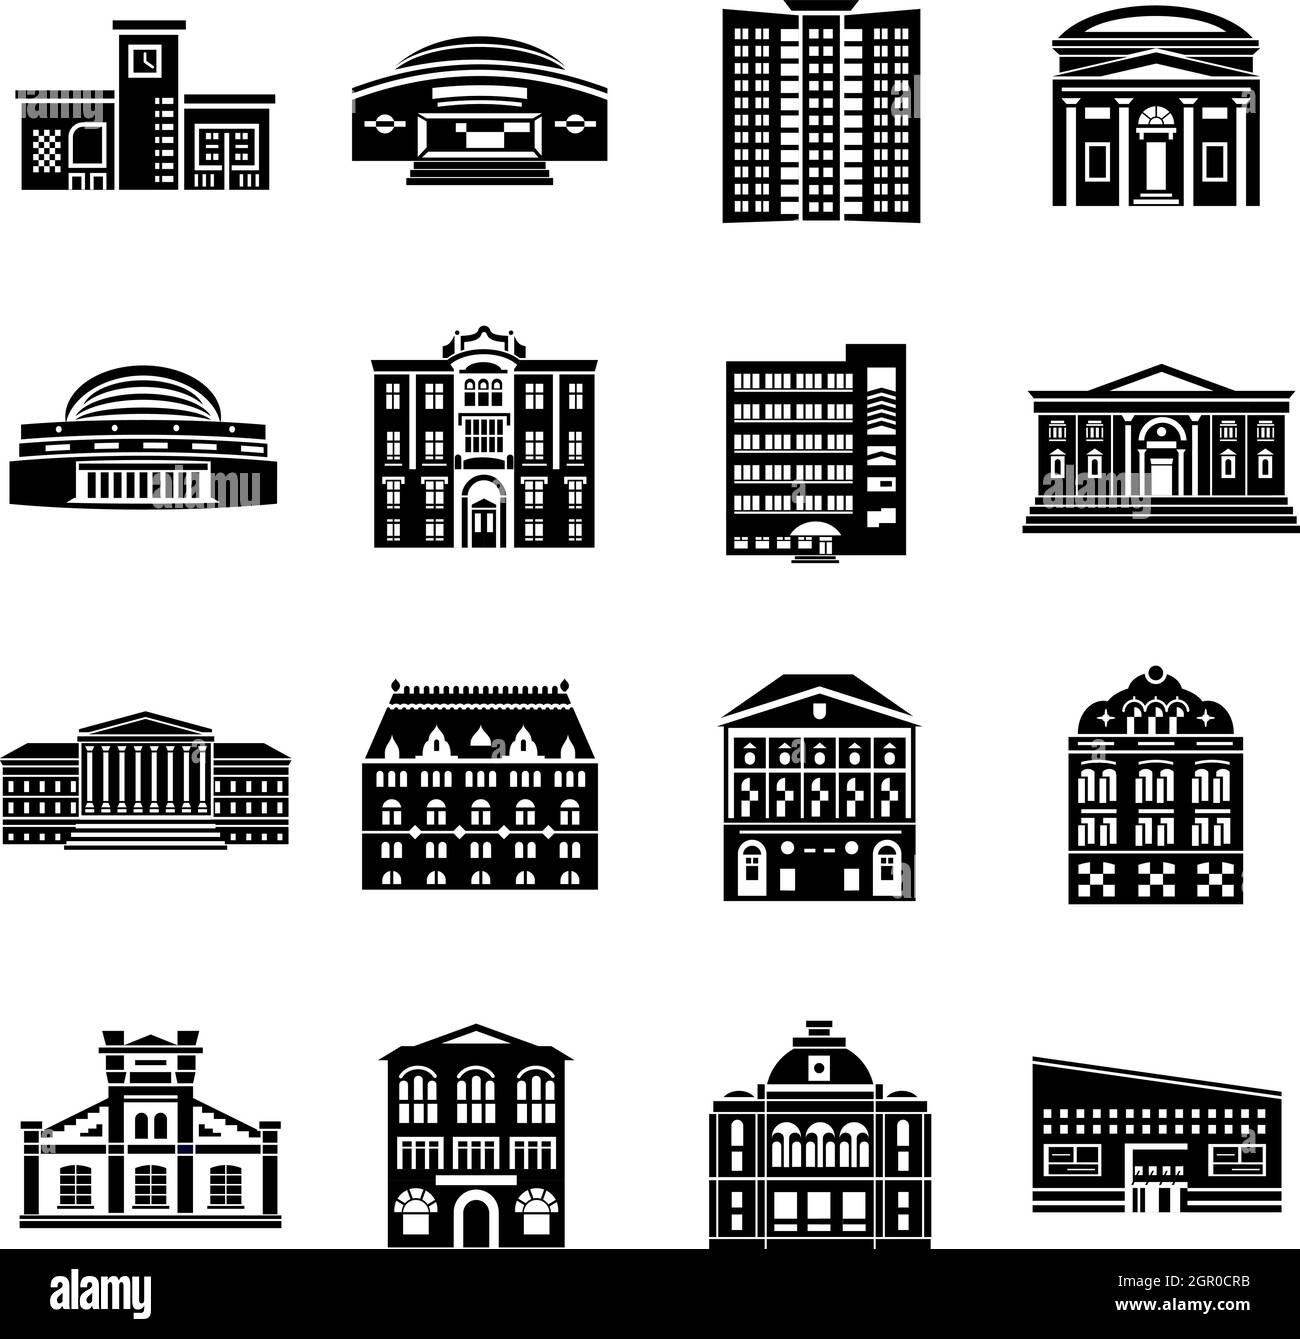 Public buildings icons set, simple style Stock Vector